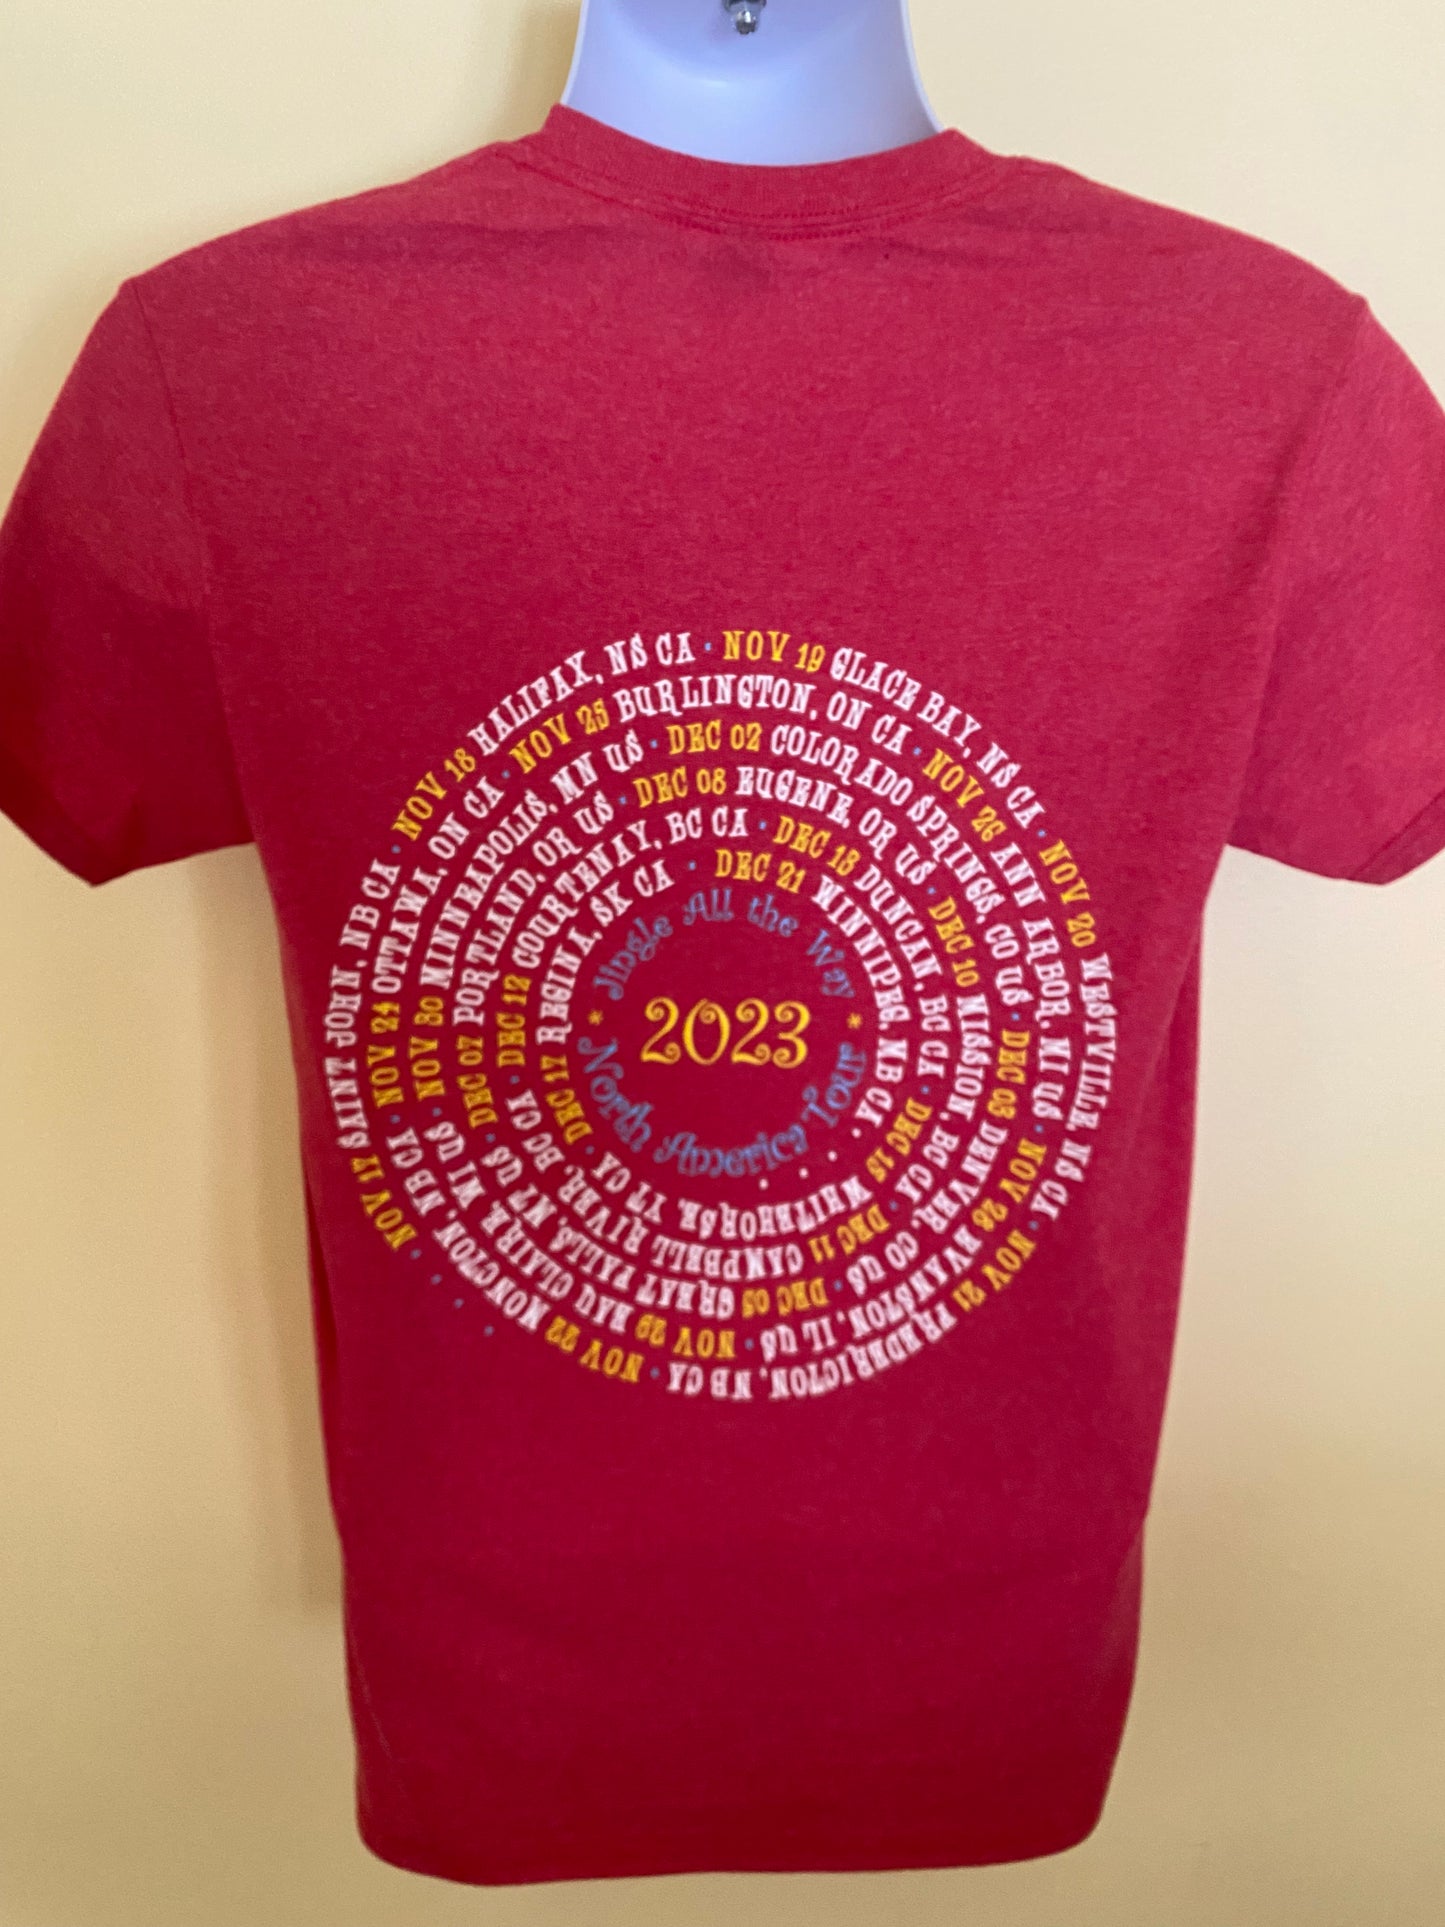 2023 Jingle All The Way Tour Shirt (with dates) - Crew Neck Red